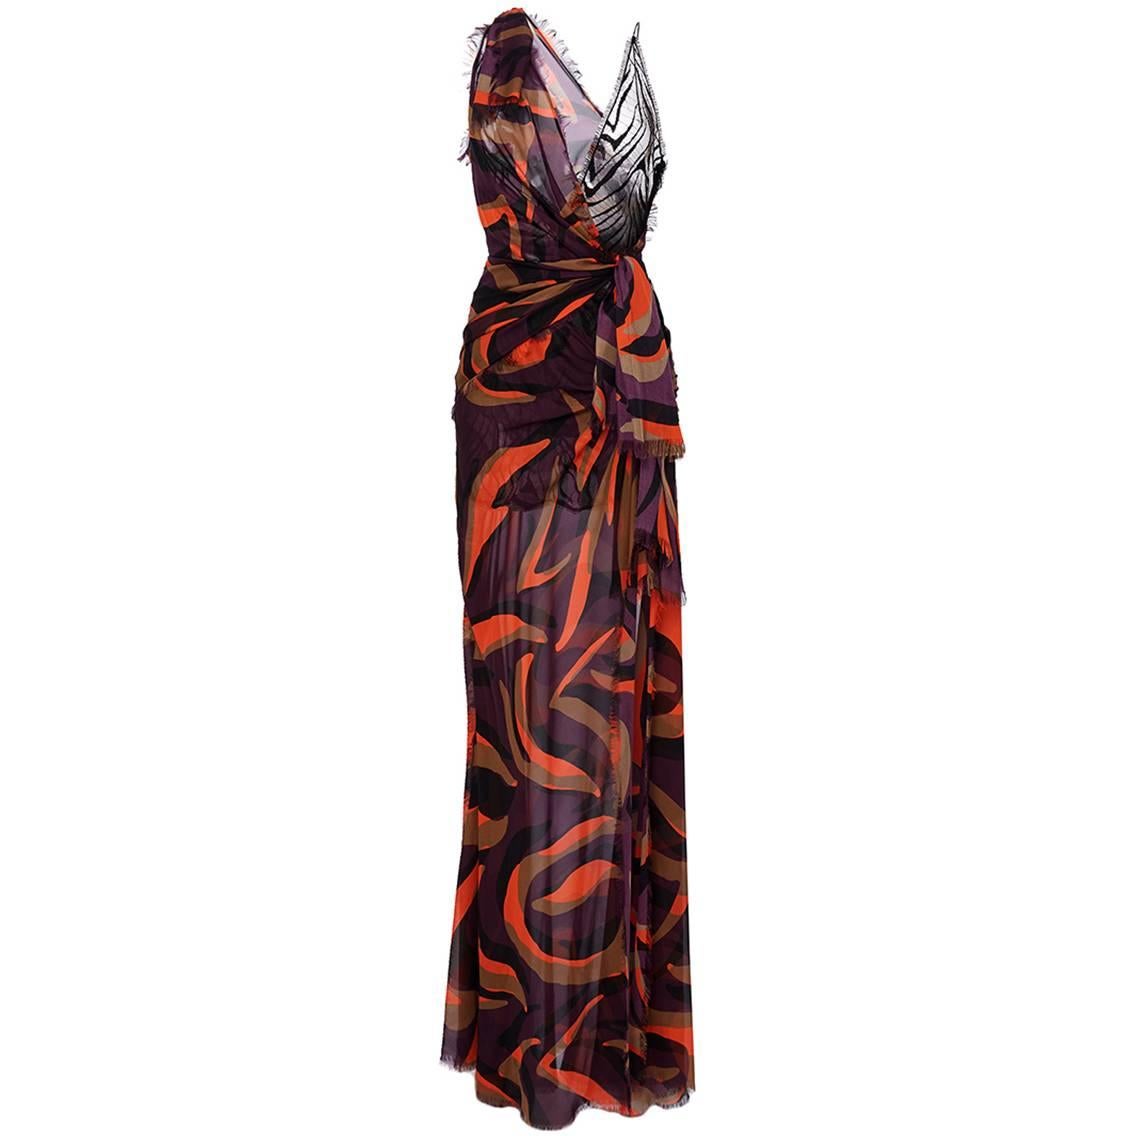 New VERSACE PRINTED SILK DRESS WITH LACE